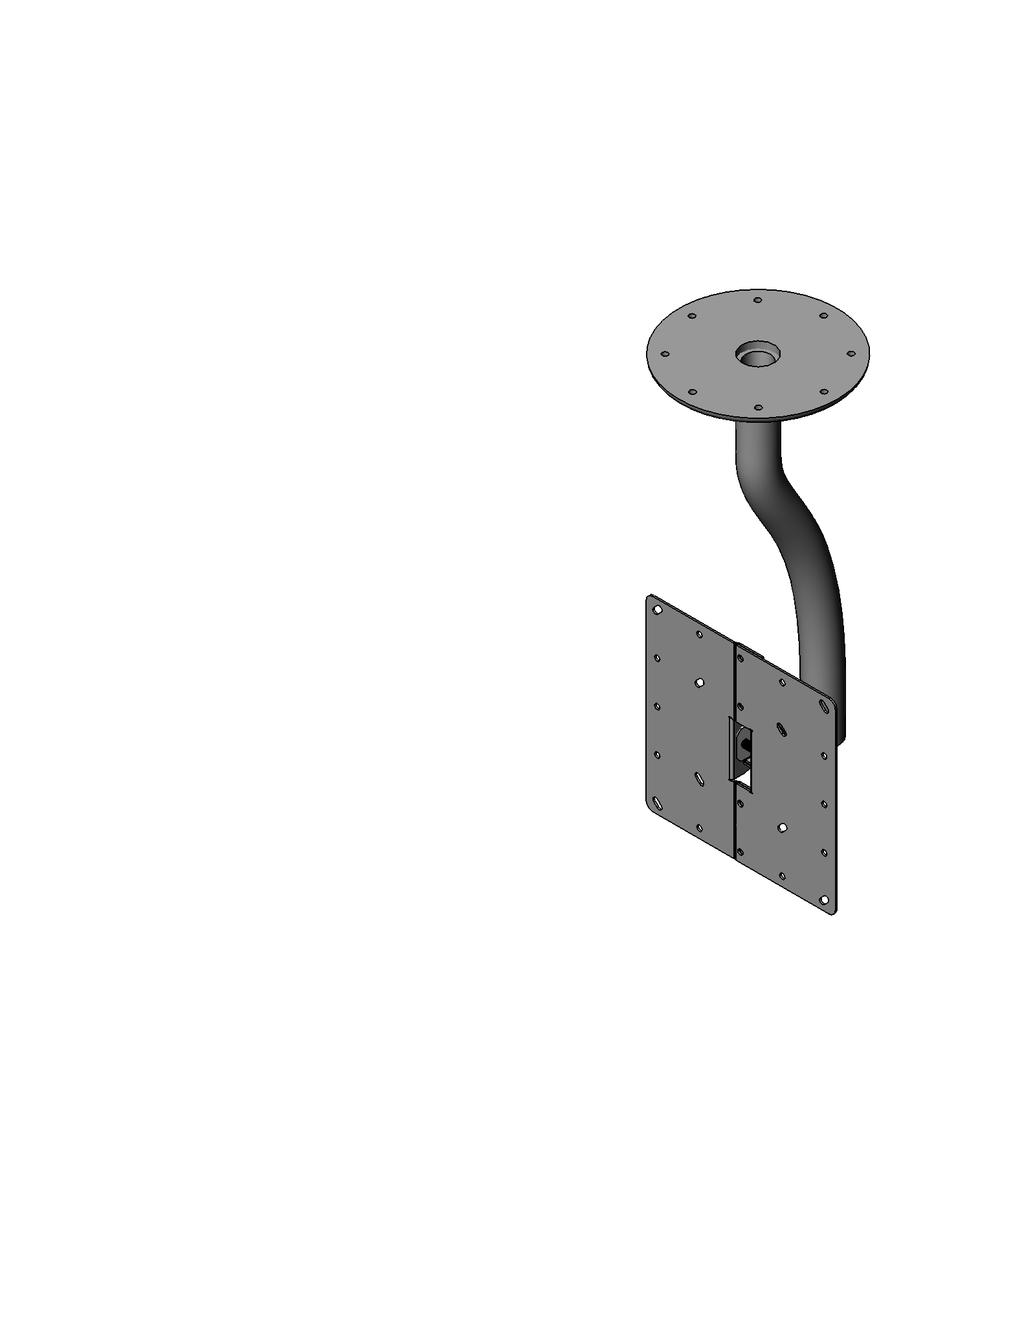 Page 1 of 6 LC200C9F Ceiling Mount for up to 32" Flat Panel Screens with 200mm x 200mm VESA Mounting Patterns The LC200C9F Flat Screen Ceiling Mount is designed to suspend a monitor from a round